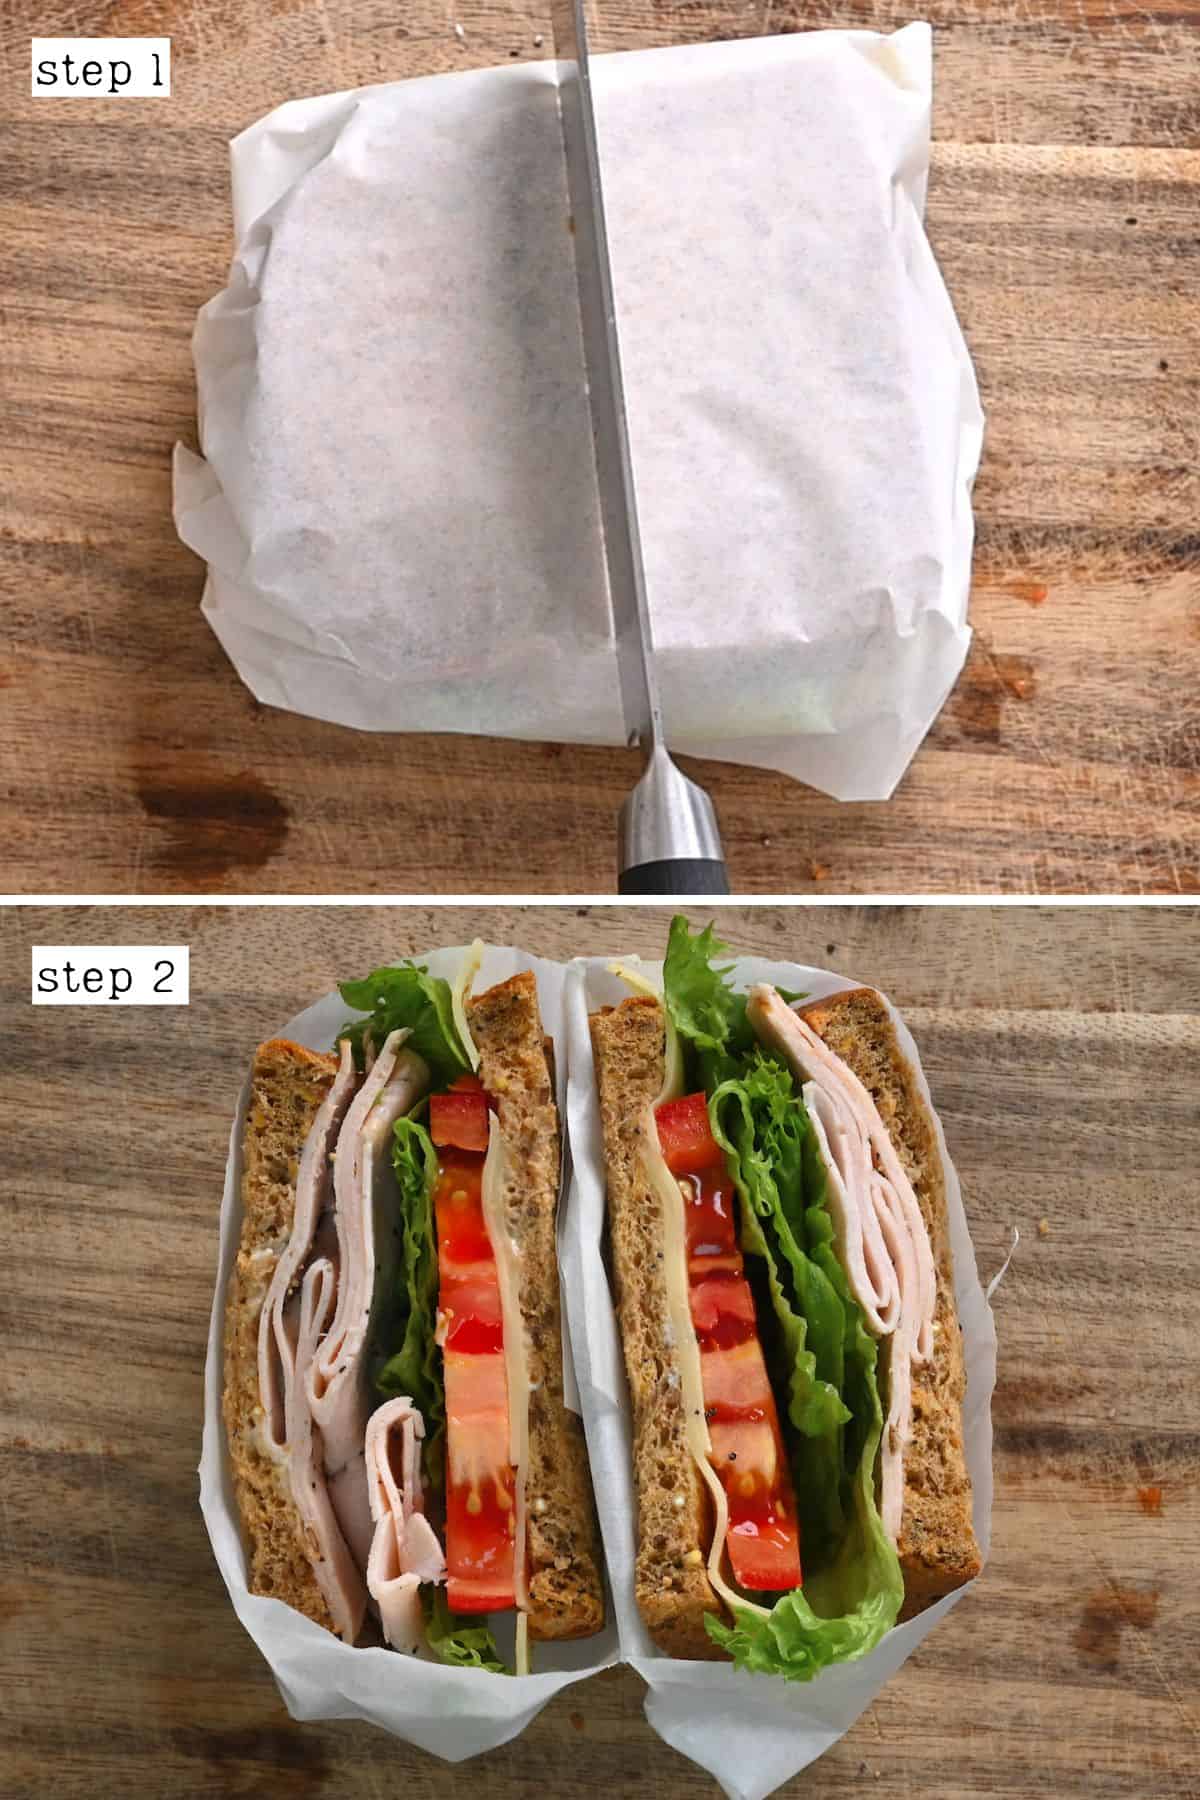 Steps for cutting a sandwich in two